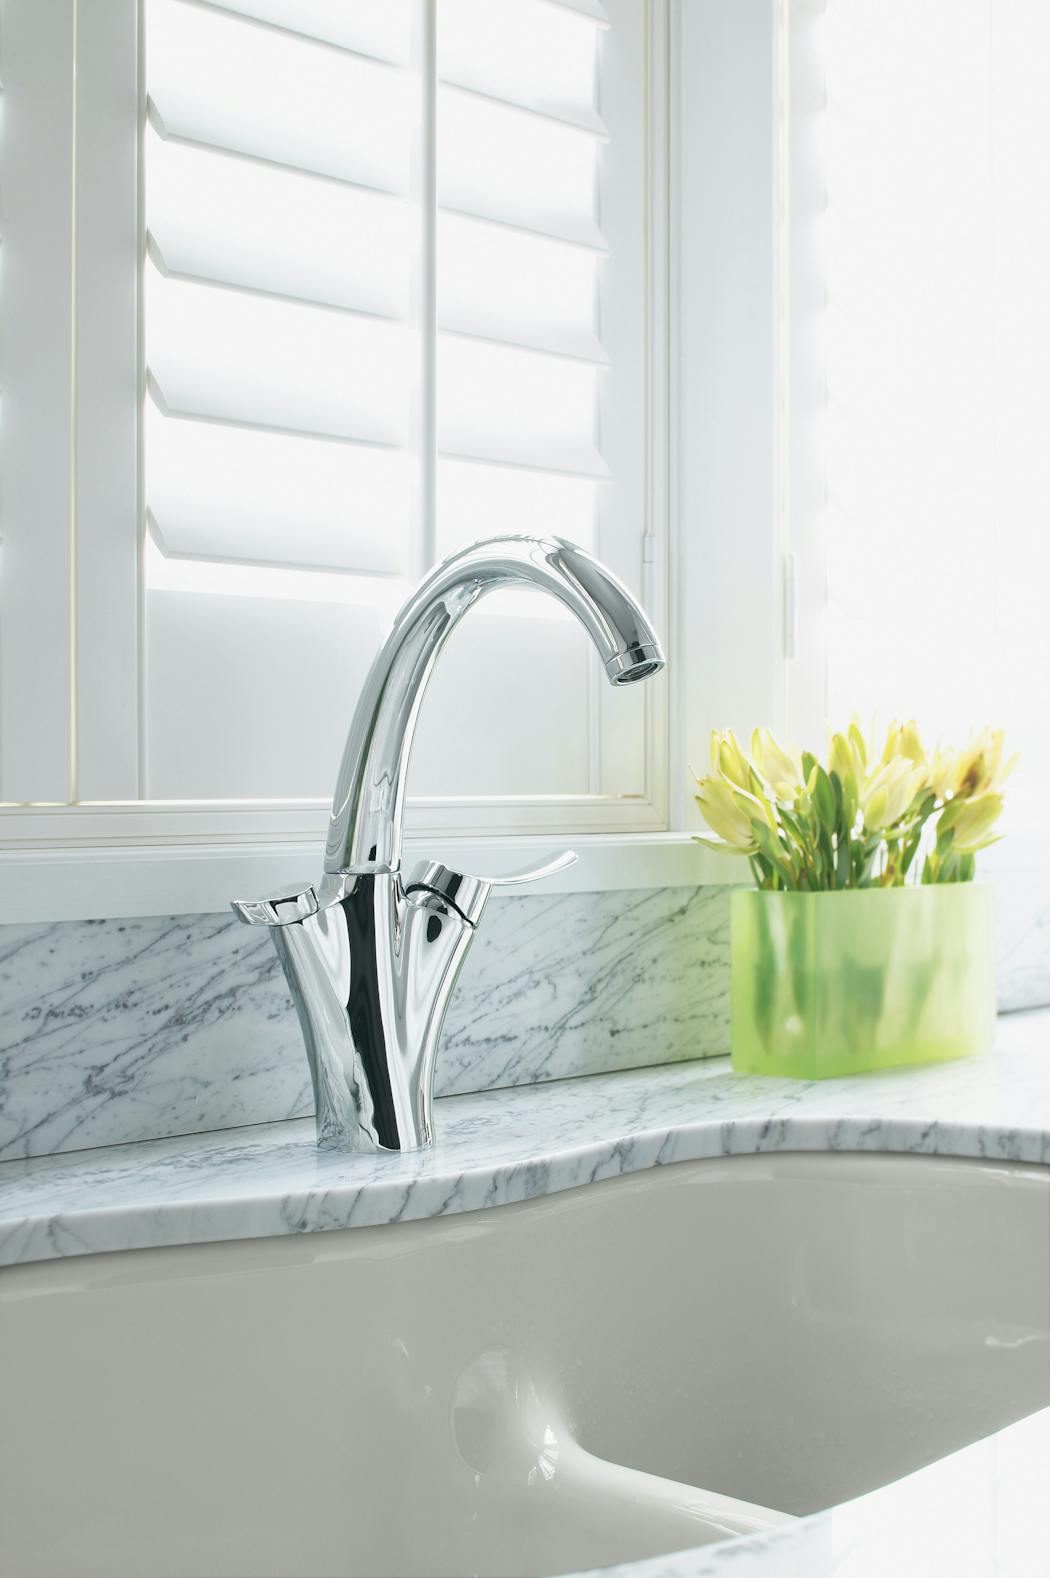 All-in-one kitchen faucets are designed to combine the benefits of a standard single-lever kitchen faucet, along with an option to deliver on-demand filtered water. 